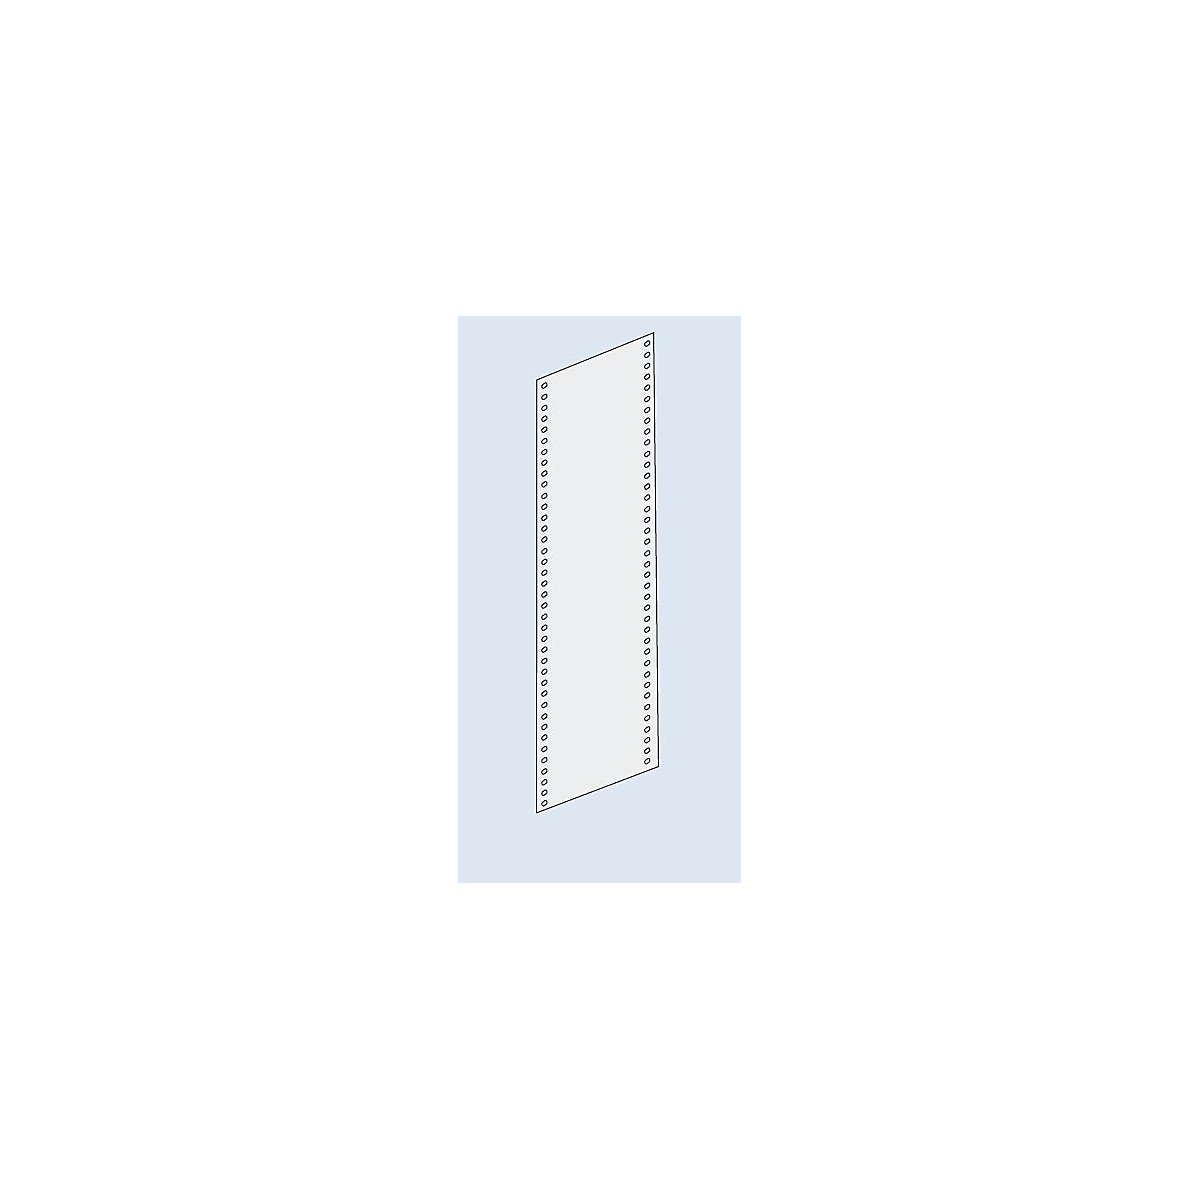 Side panel cladding – eurokraft pro, solid sheet, height 2000 mm, for depth 400 mm, zinc plated-7